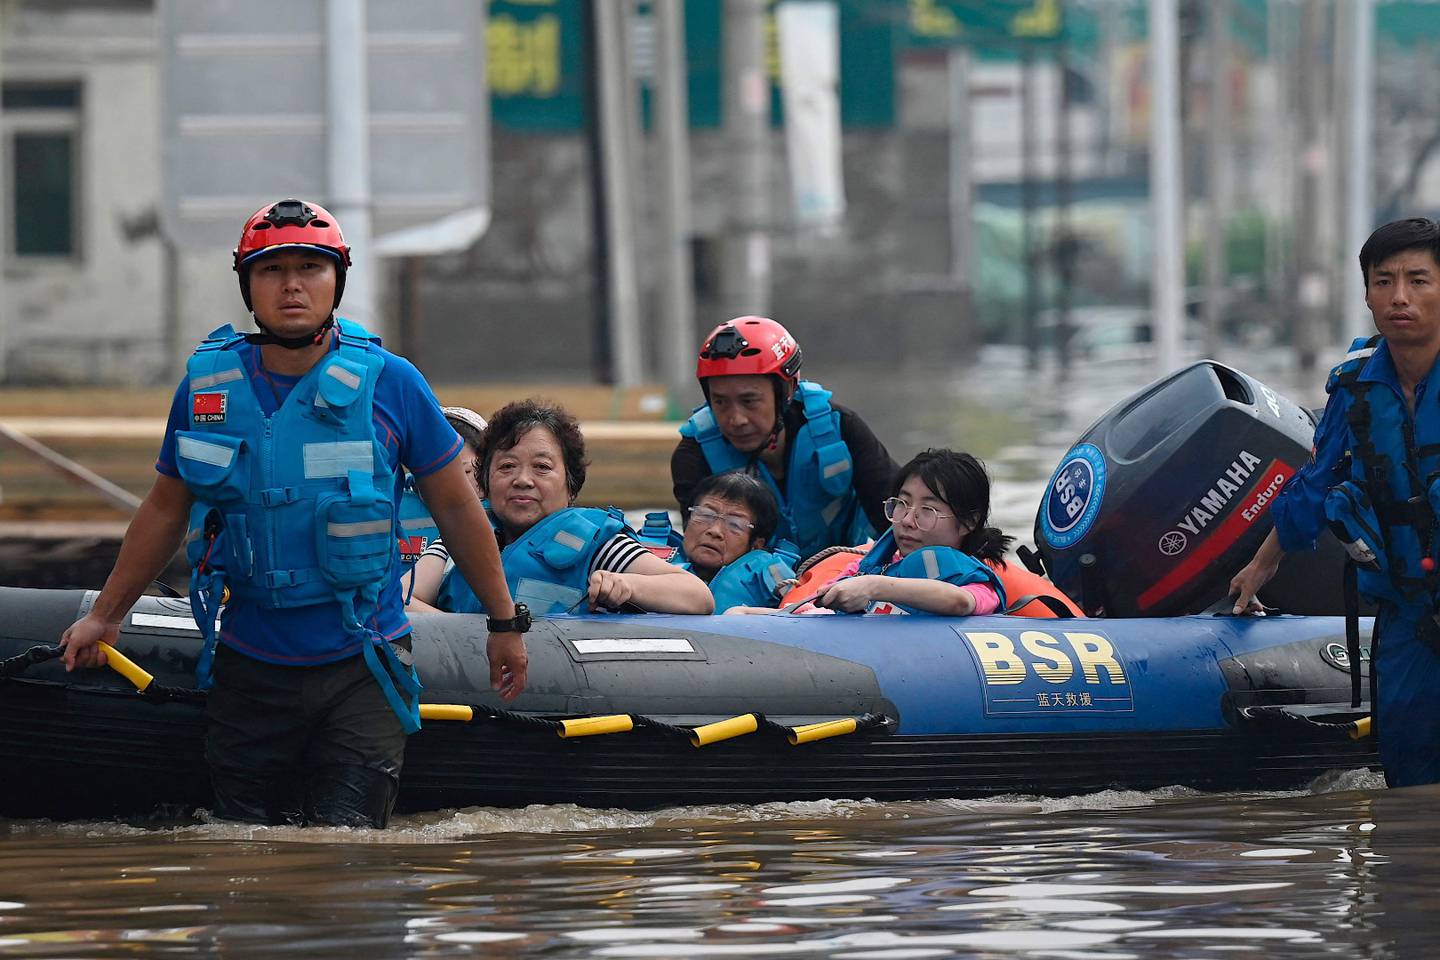 Beijing hit by heaviest rains since records began 140 years ago